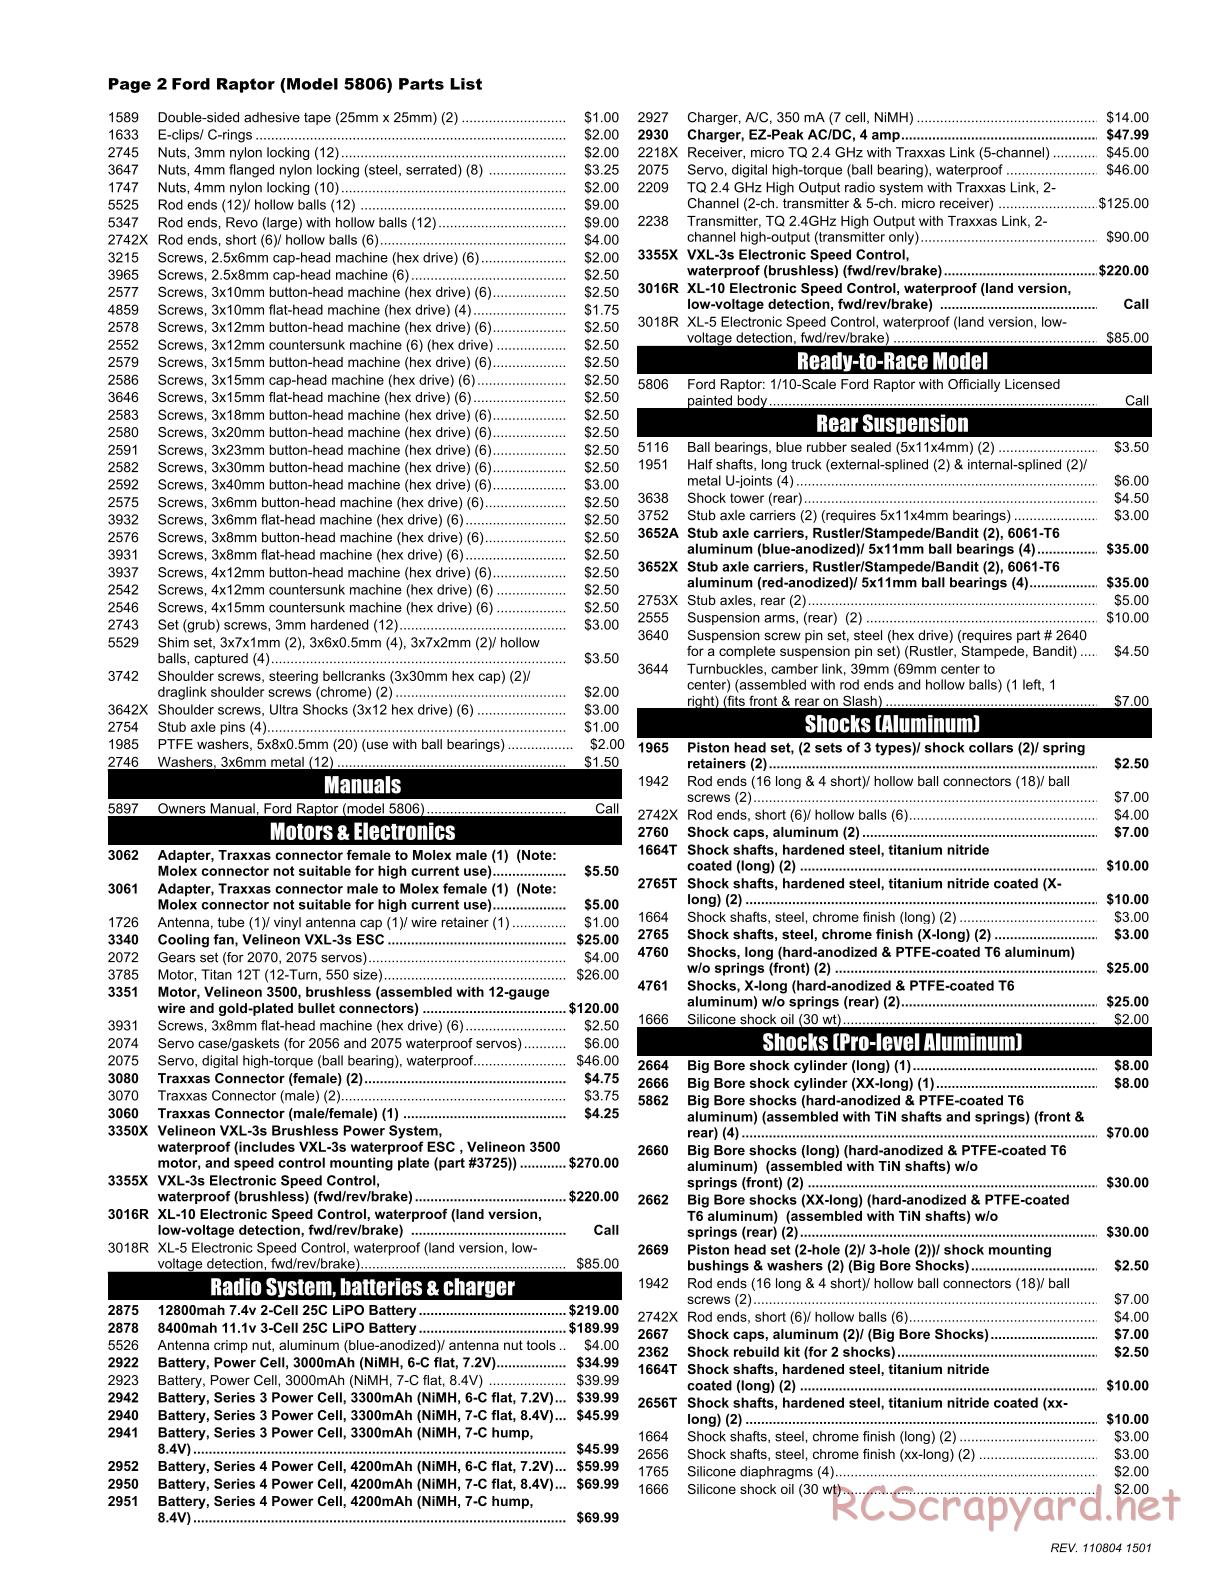 Traxxas - Ford F-150 SVT Raptor (2011) - Parts List - Page 2